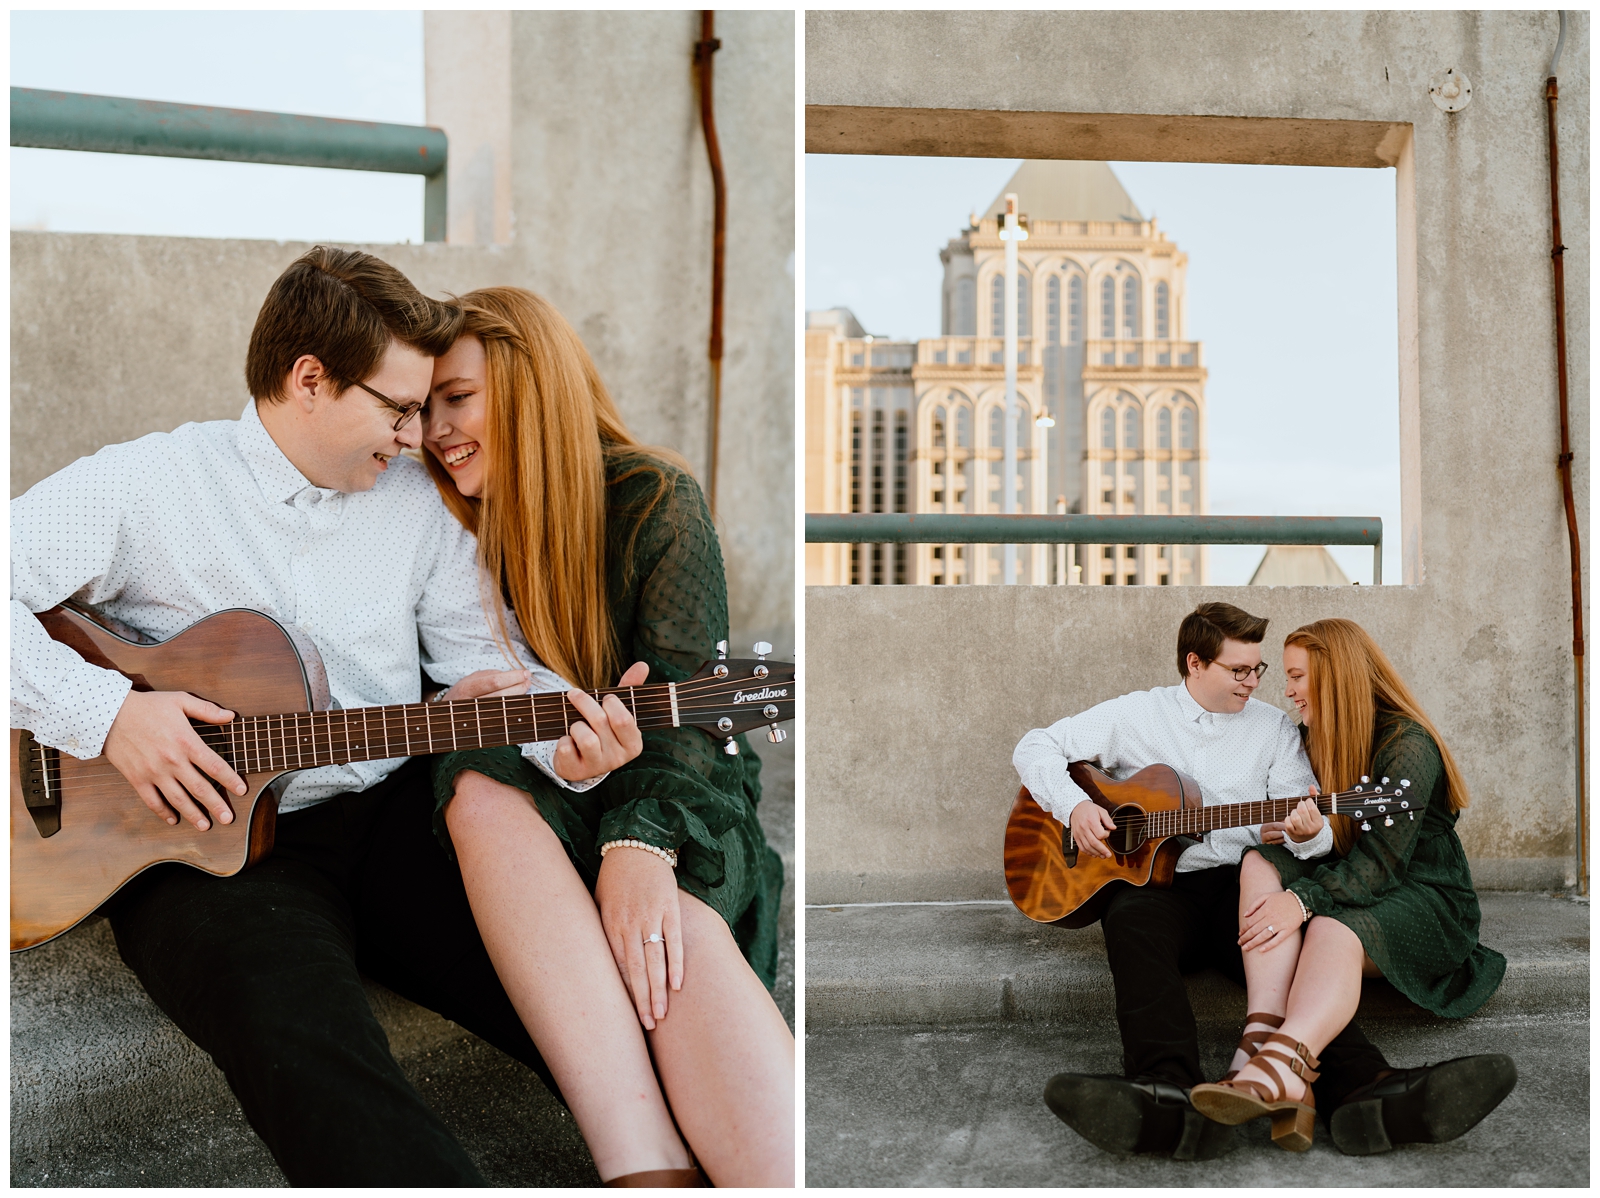 Parking garage downtown Greensboro, NC engagement session with guitar by North Carolina wedding and elopement photographer